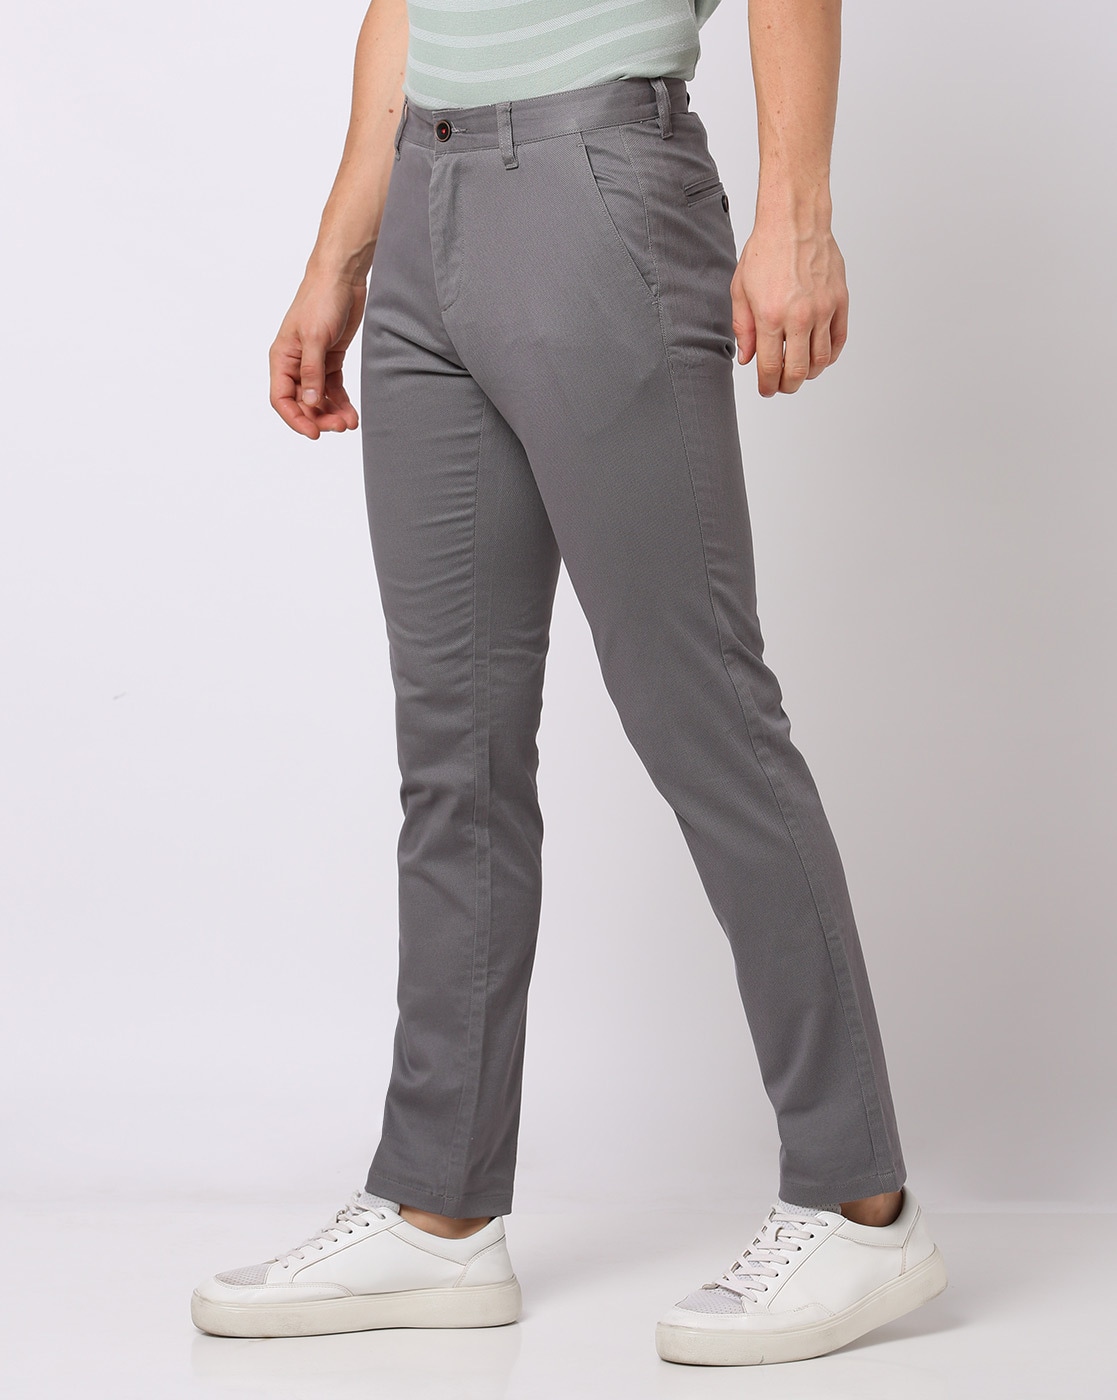 PARX Tapered Men Grey Trousers - Buy PARX Tapered Men Grey Trousers Online  at Best Prices in India | Flipkart.com